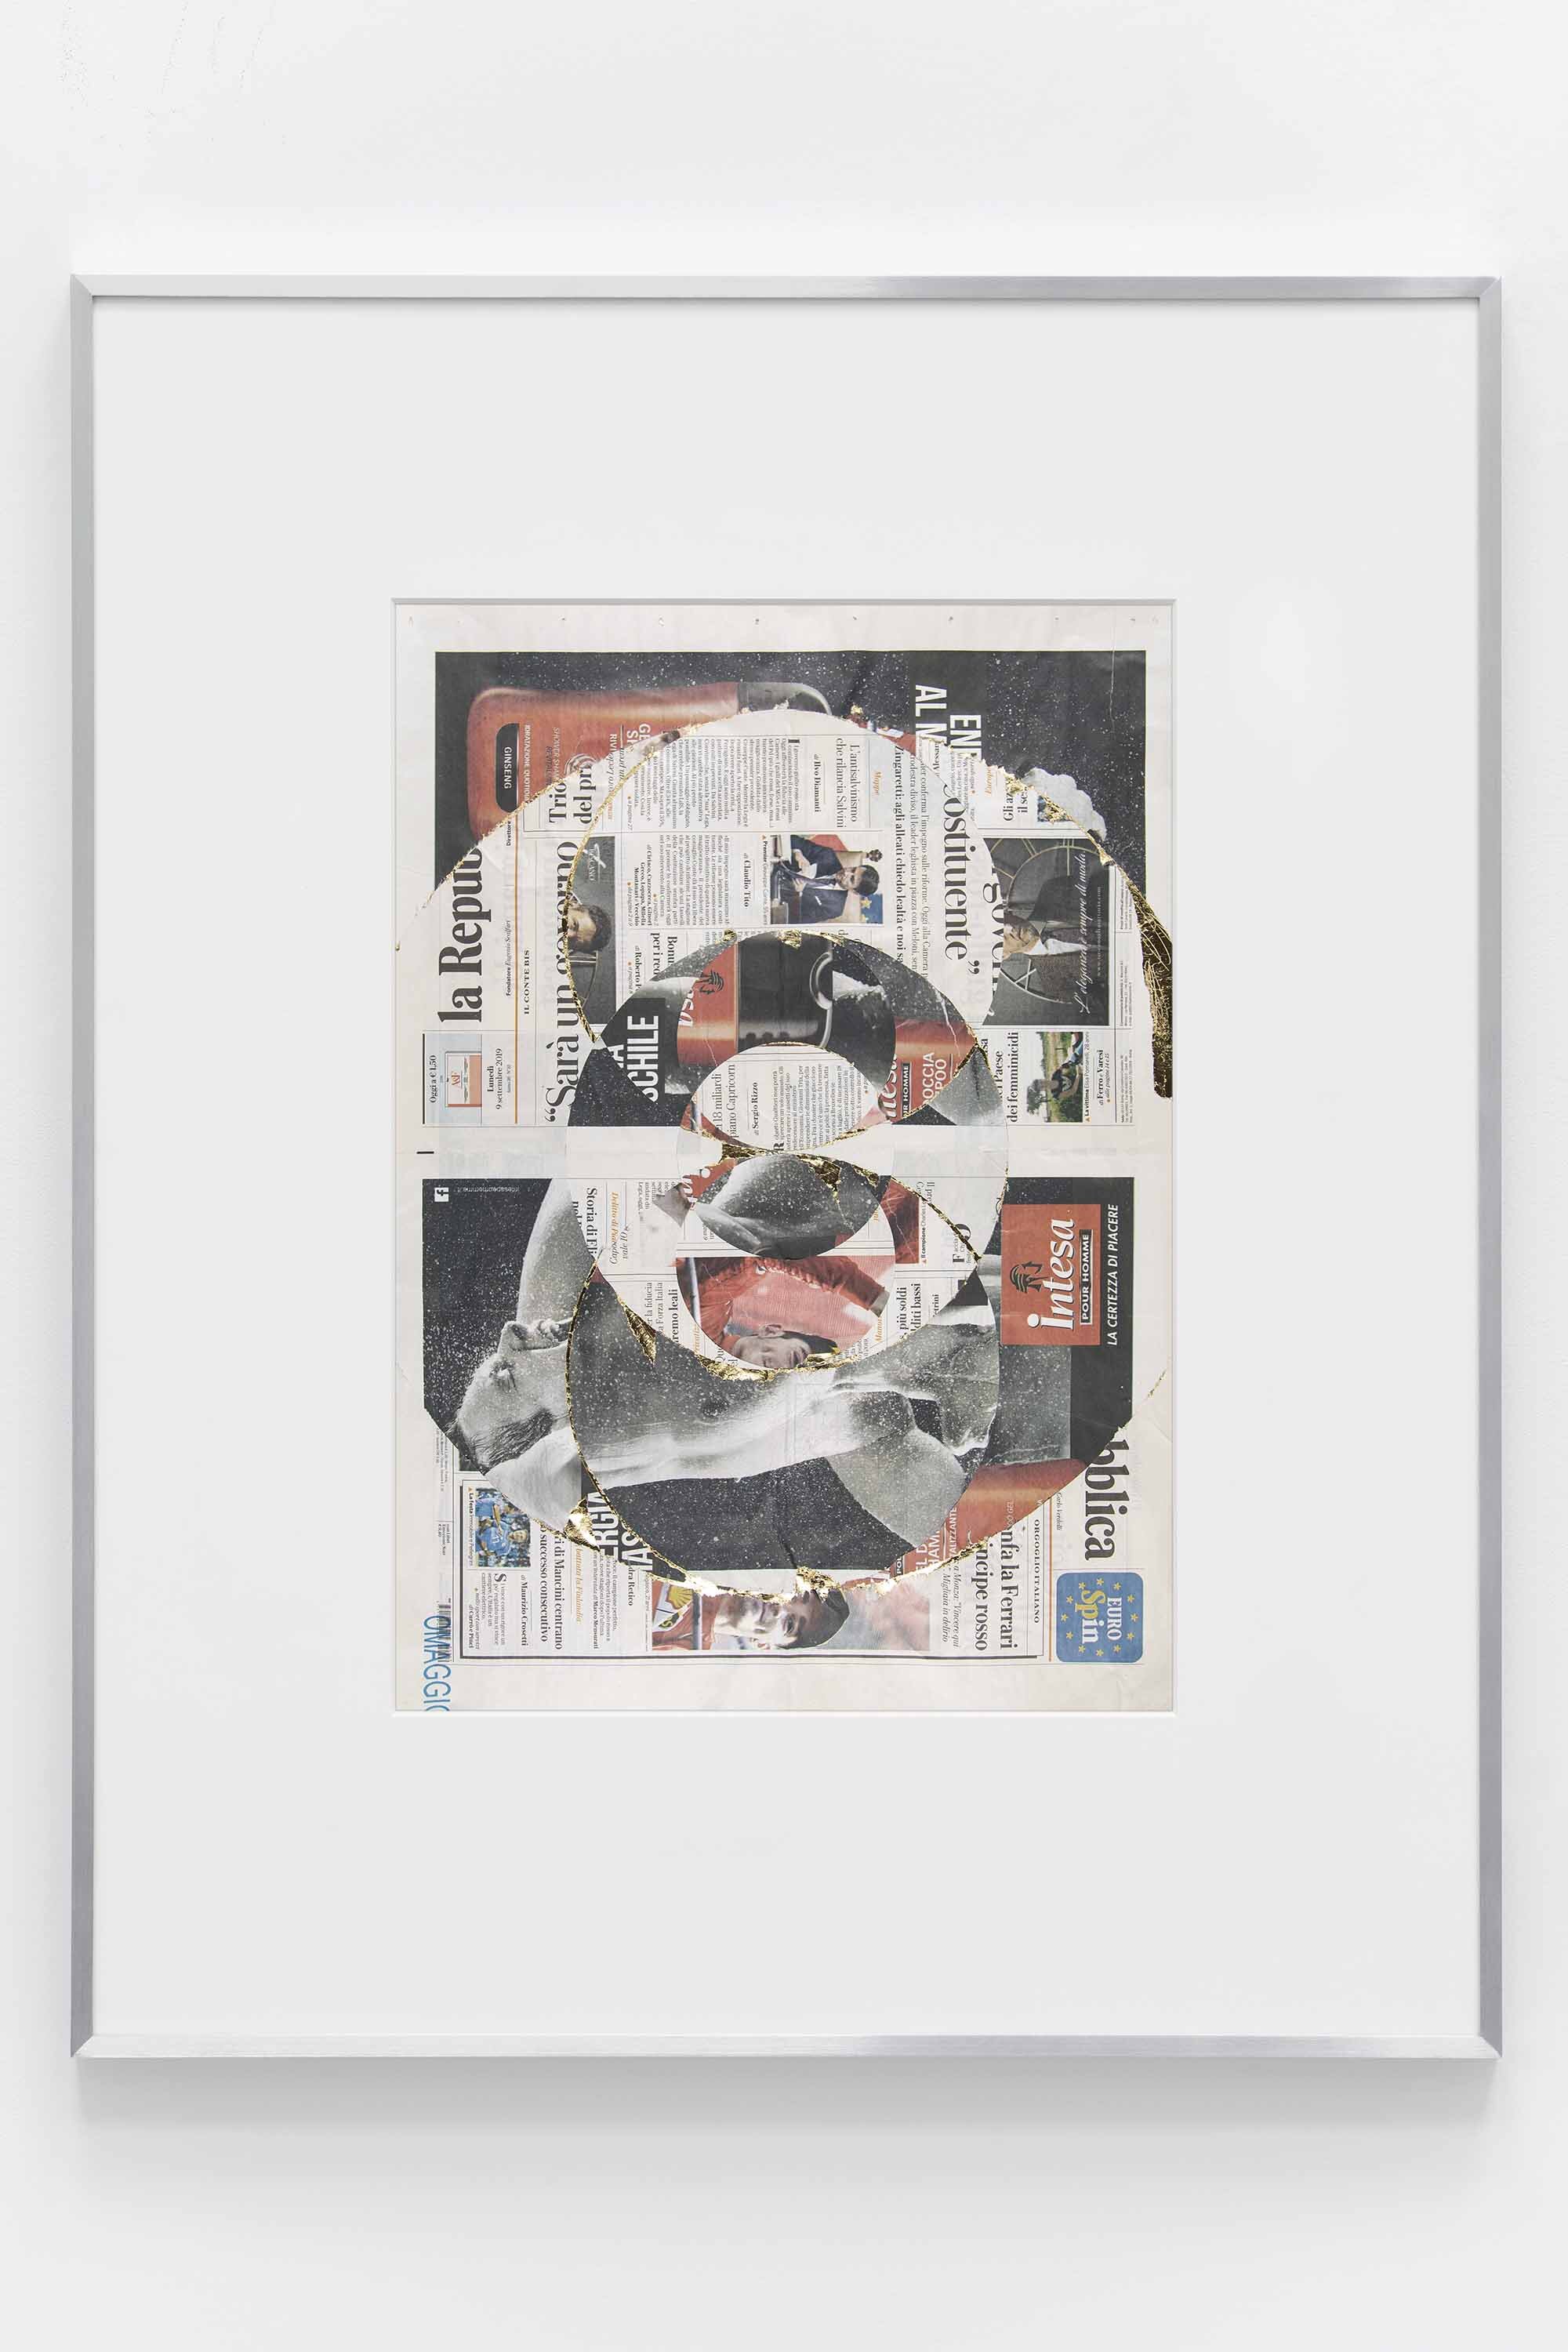   Blind Collage (Seven 180º Rotations, La Repubblica: Naples, Italy, Monday, September 9, 2019)   2021  Newspaper, tape, and 22 karat gold leaf  39 1/8 x 31 1/4 inches   Blind Collages, 2017–   Exhibition:   Foreign Correspondence, 2021  